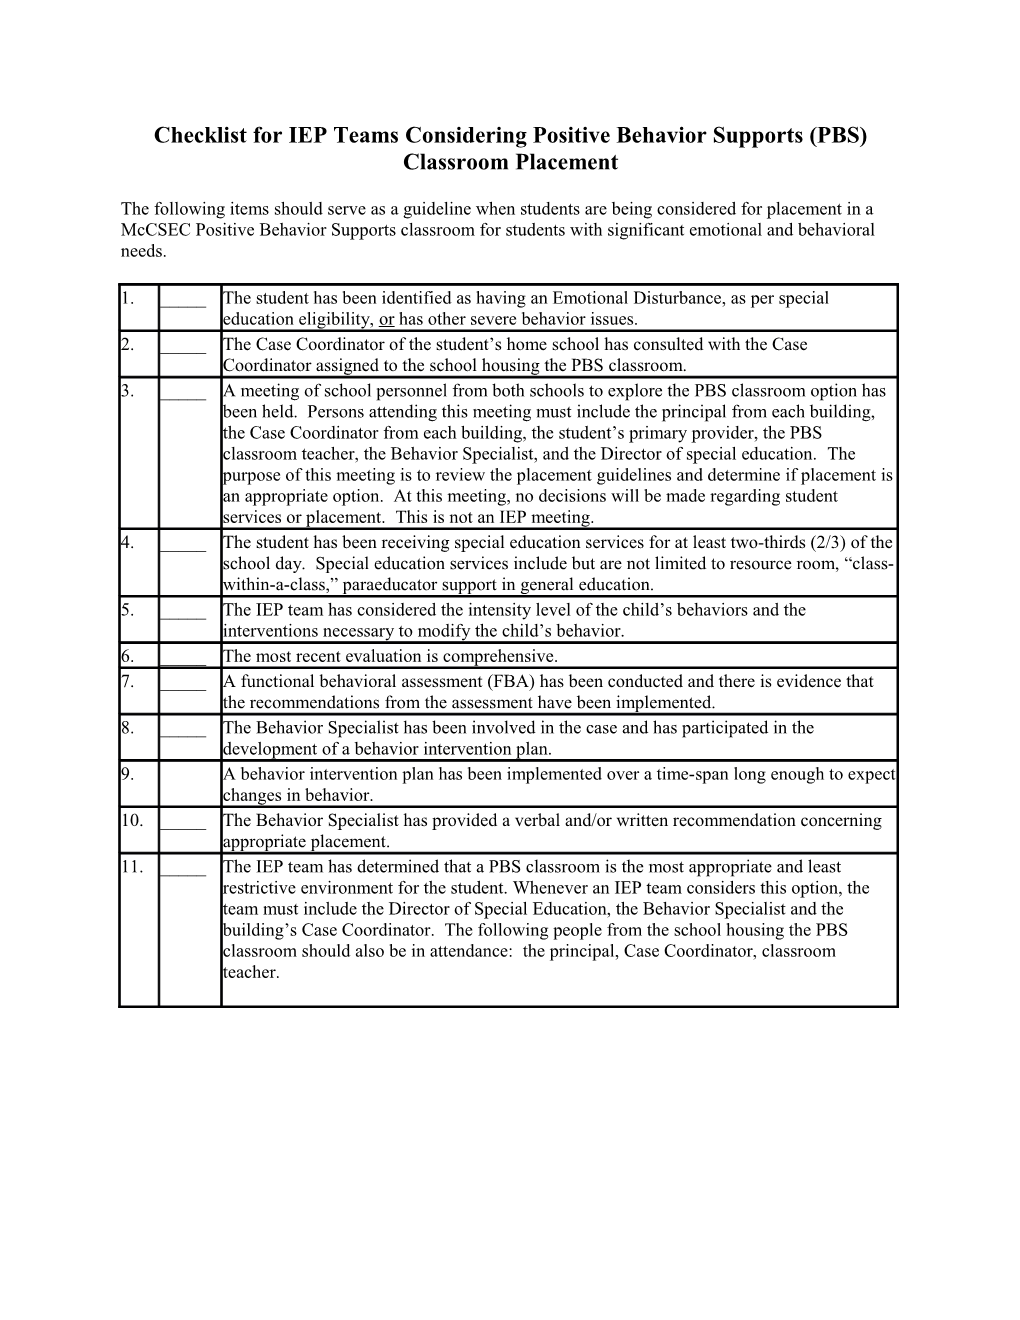 Checklist for IEP Teams Considering Positive Behavior Supports (PBS) Classroom Placement